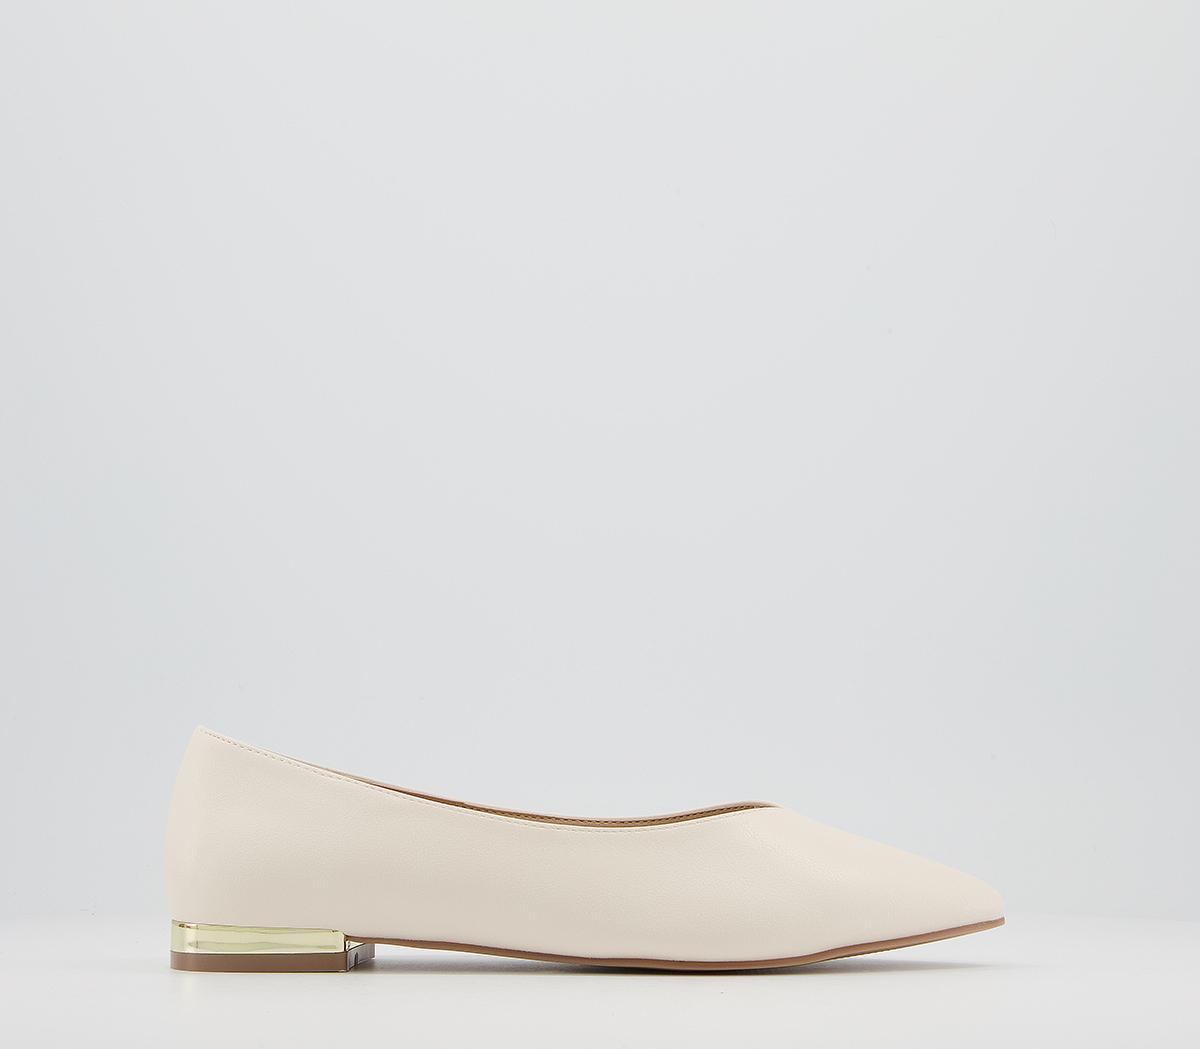 OFFICEFeathered Heel Clip Pointed PumpsWhite With Gold Heel Clip